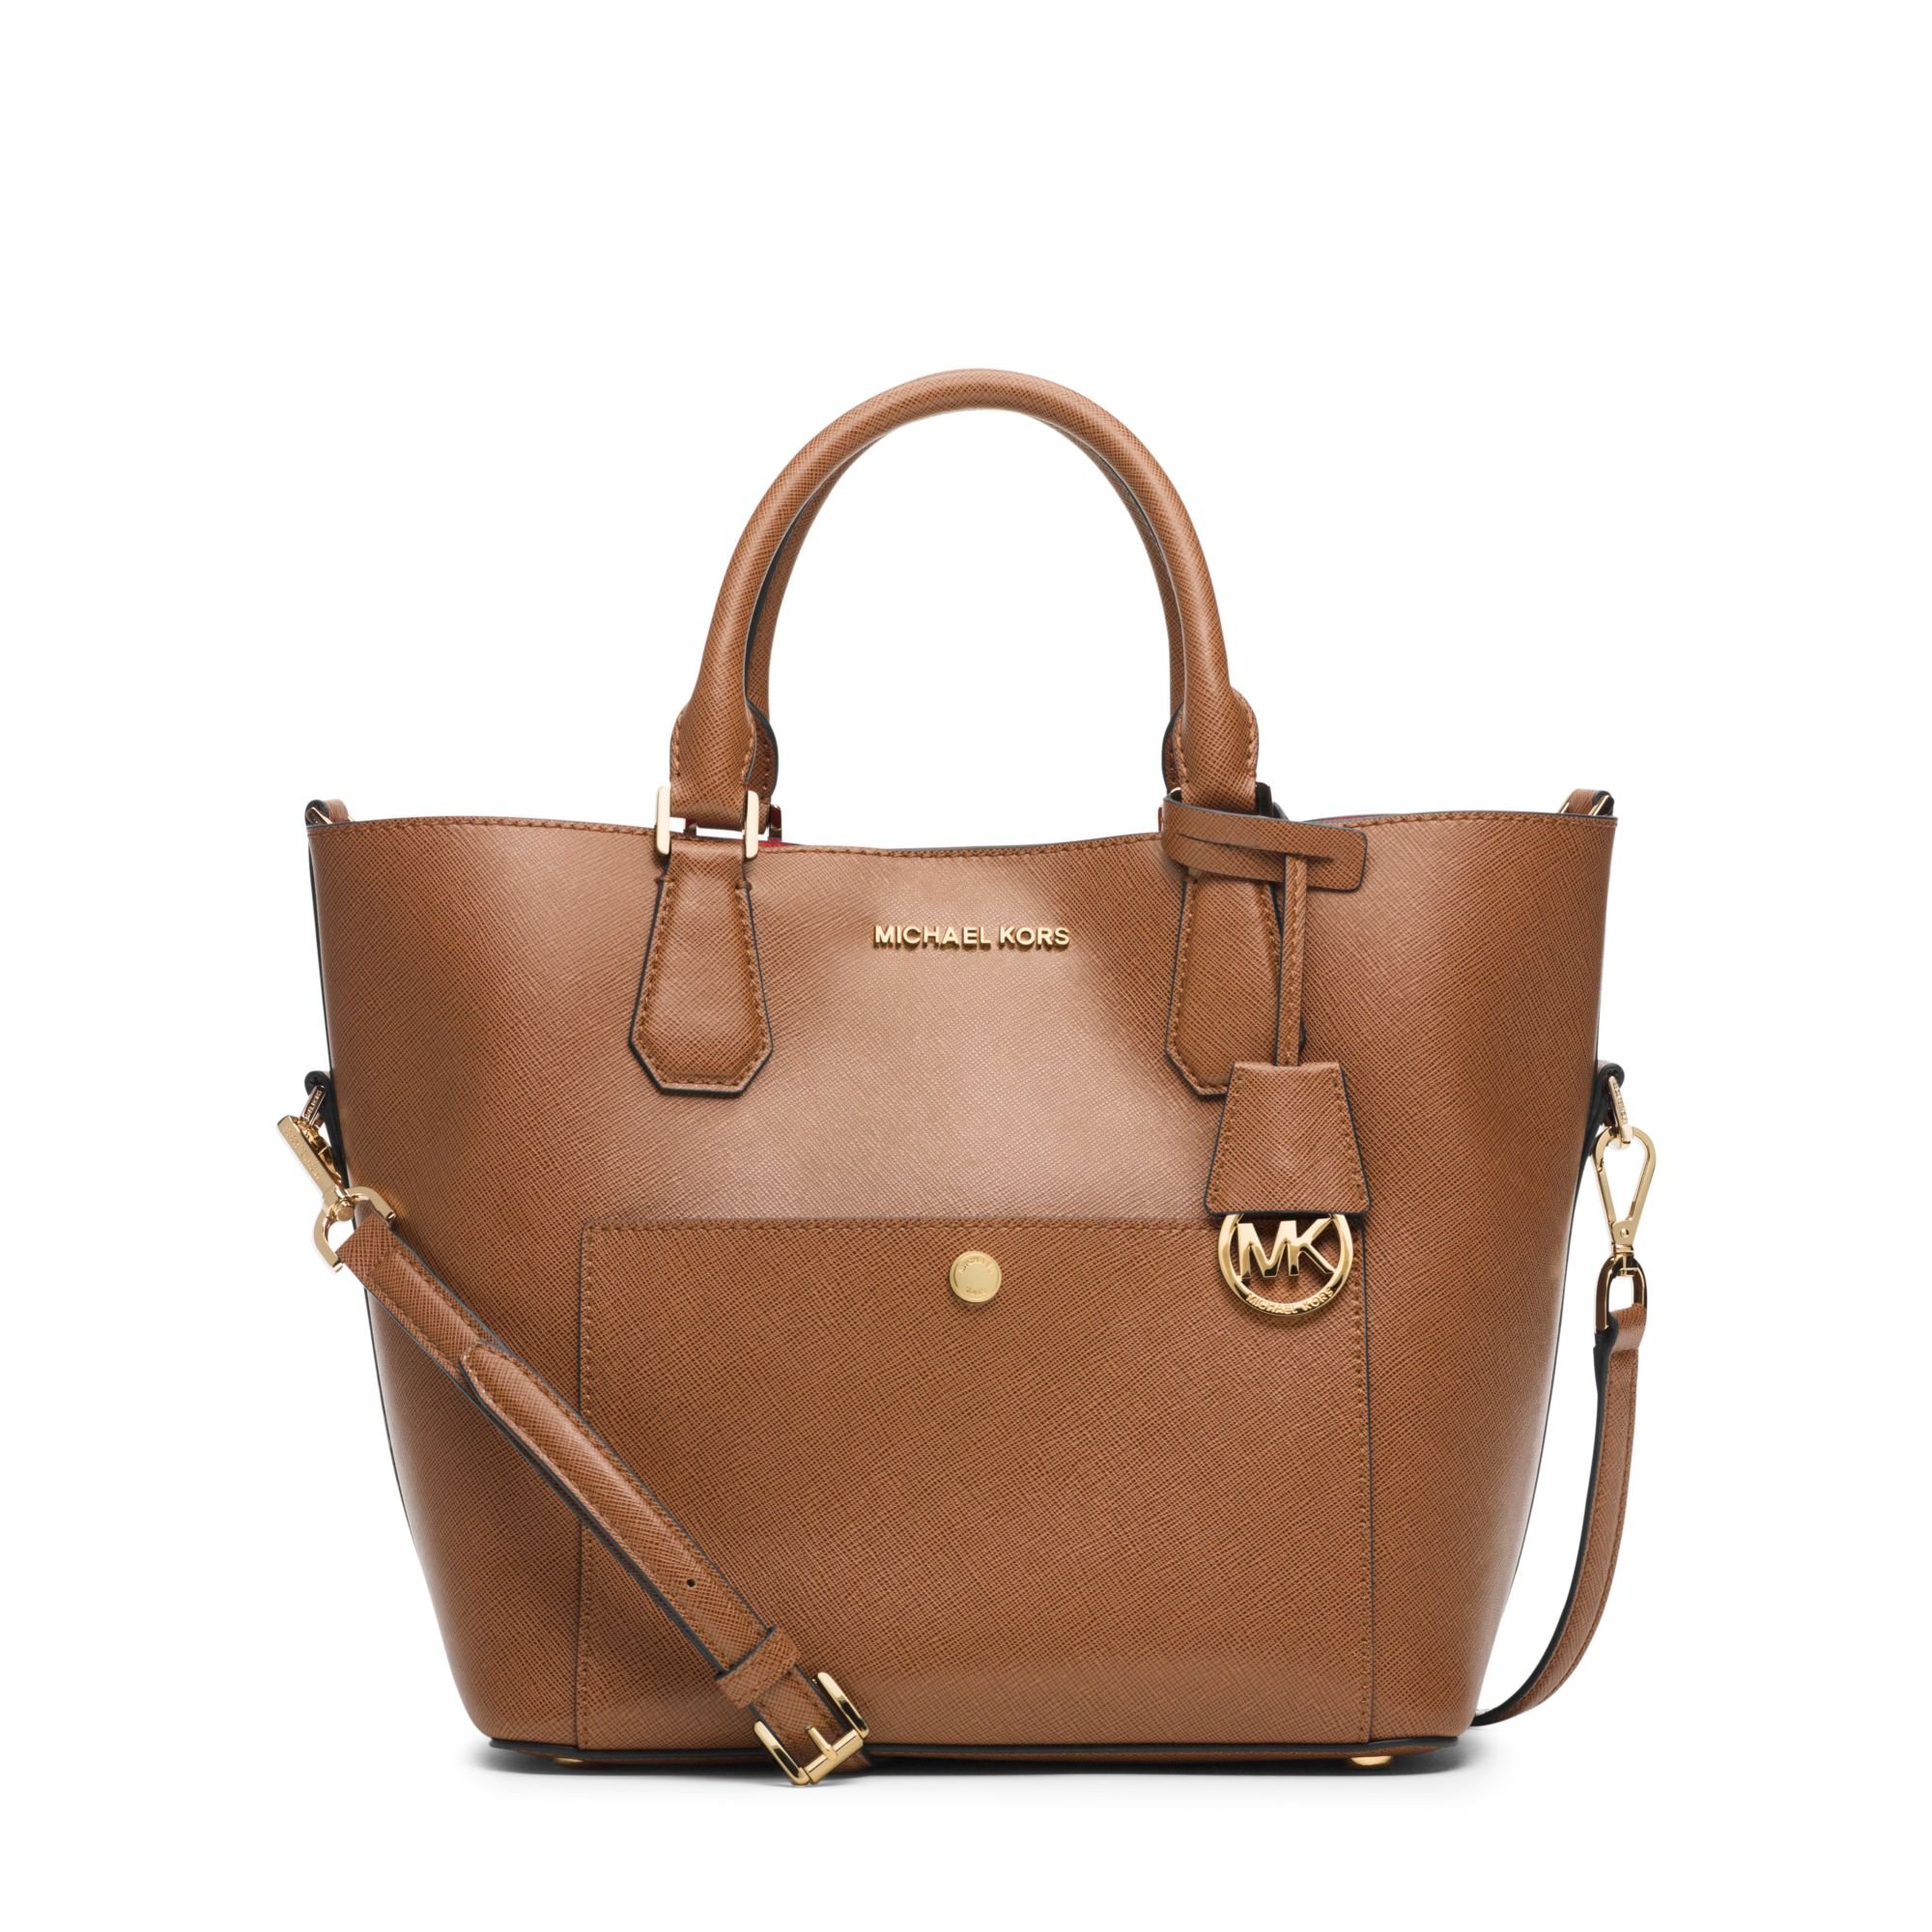 Michael Kors Greenwich Large Saffiano Leather Satchel in Brown - Lyst